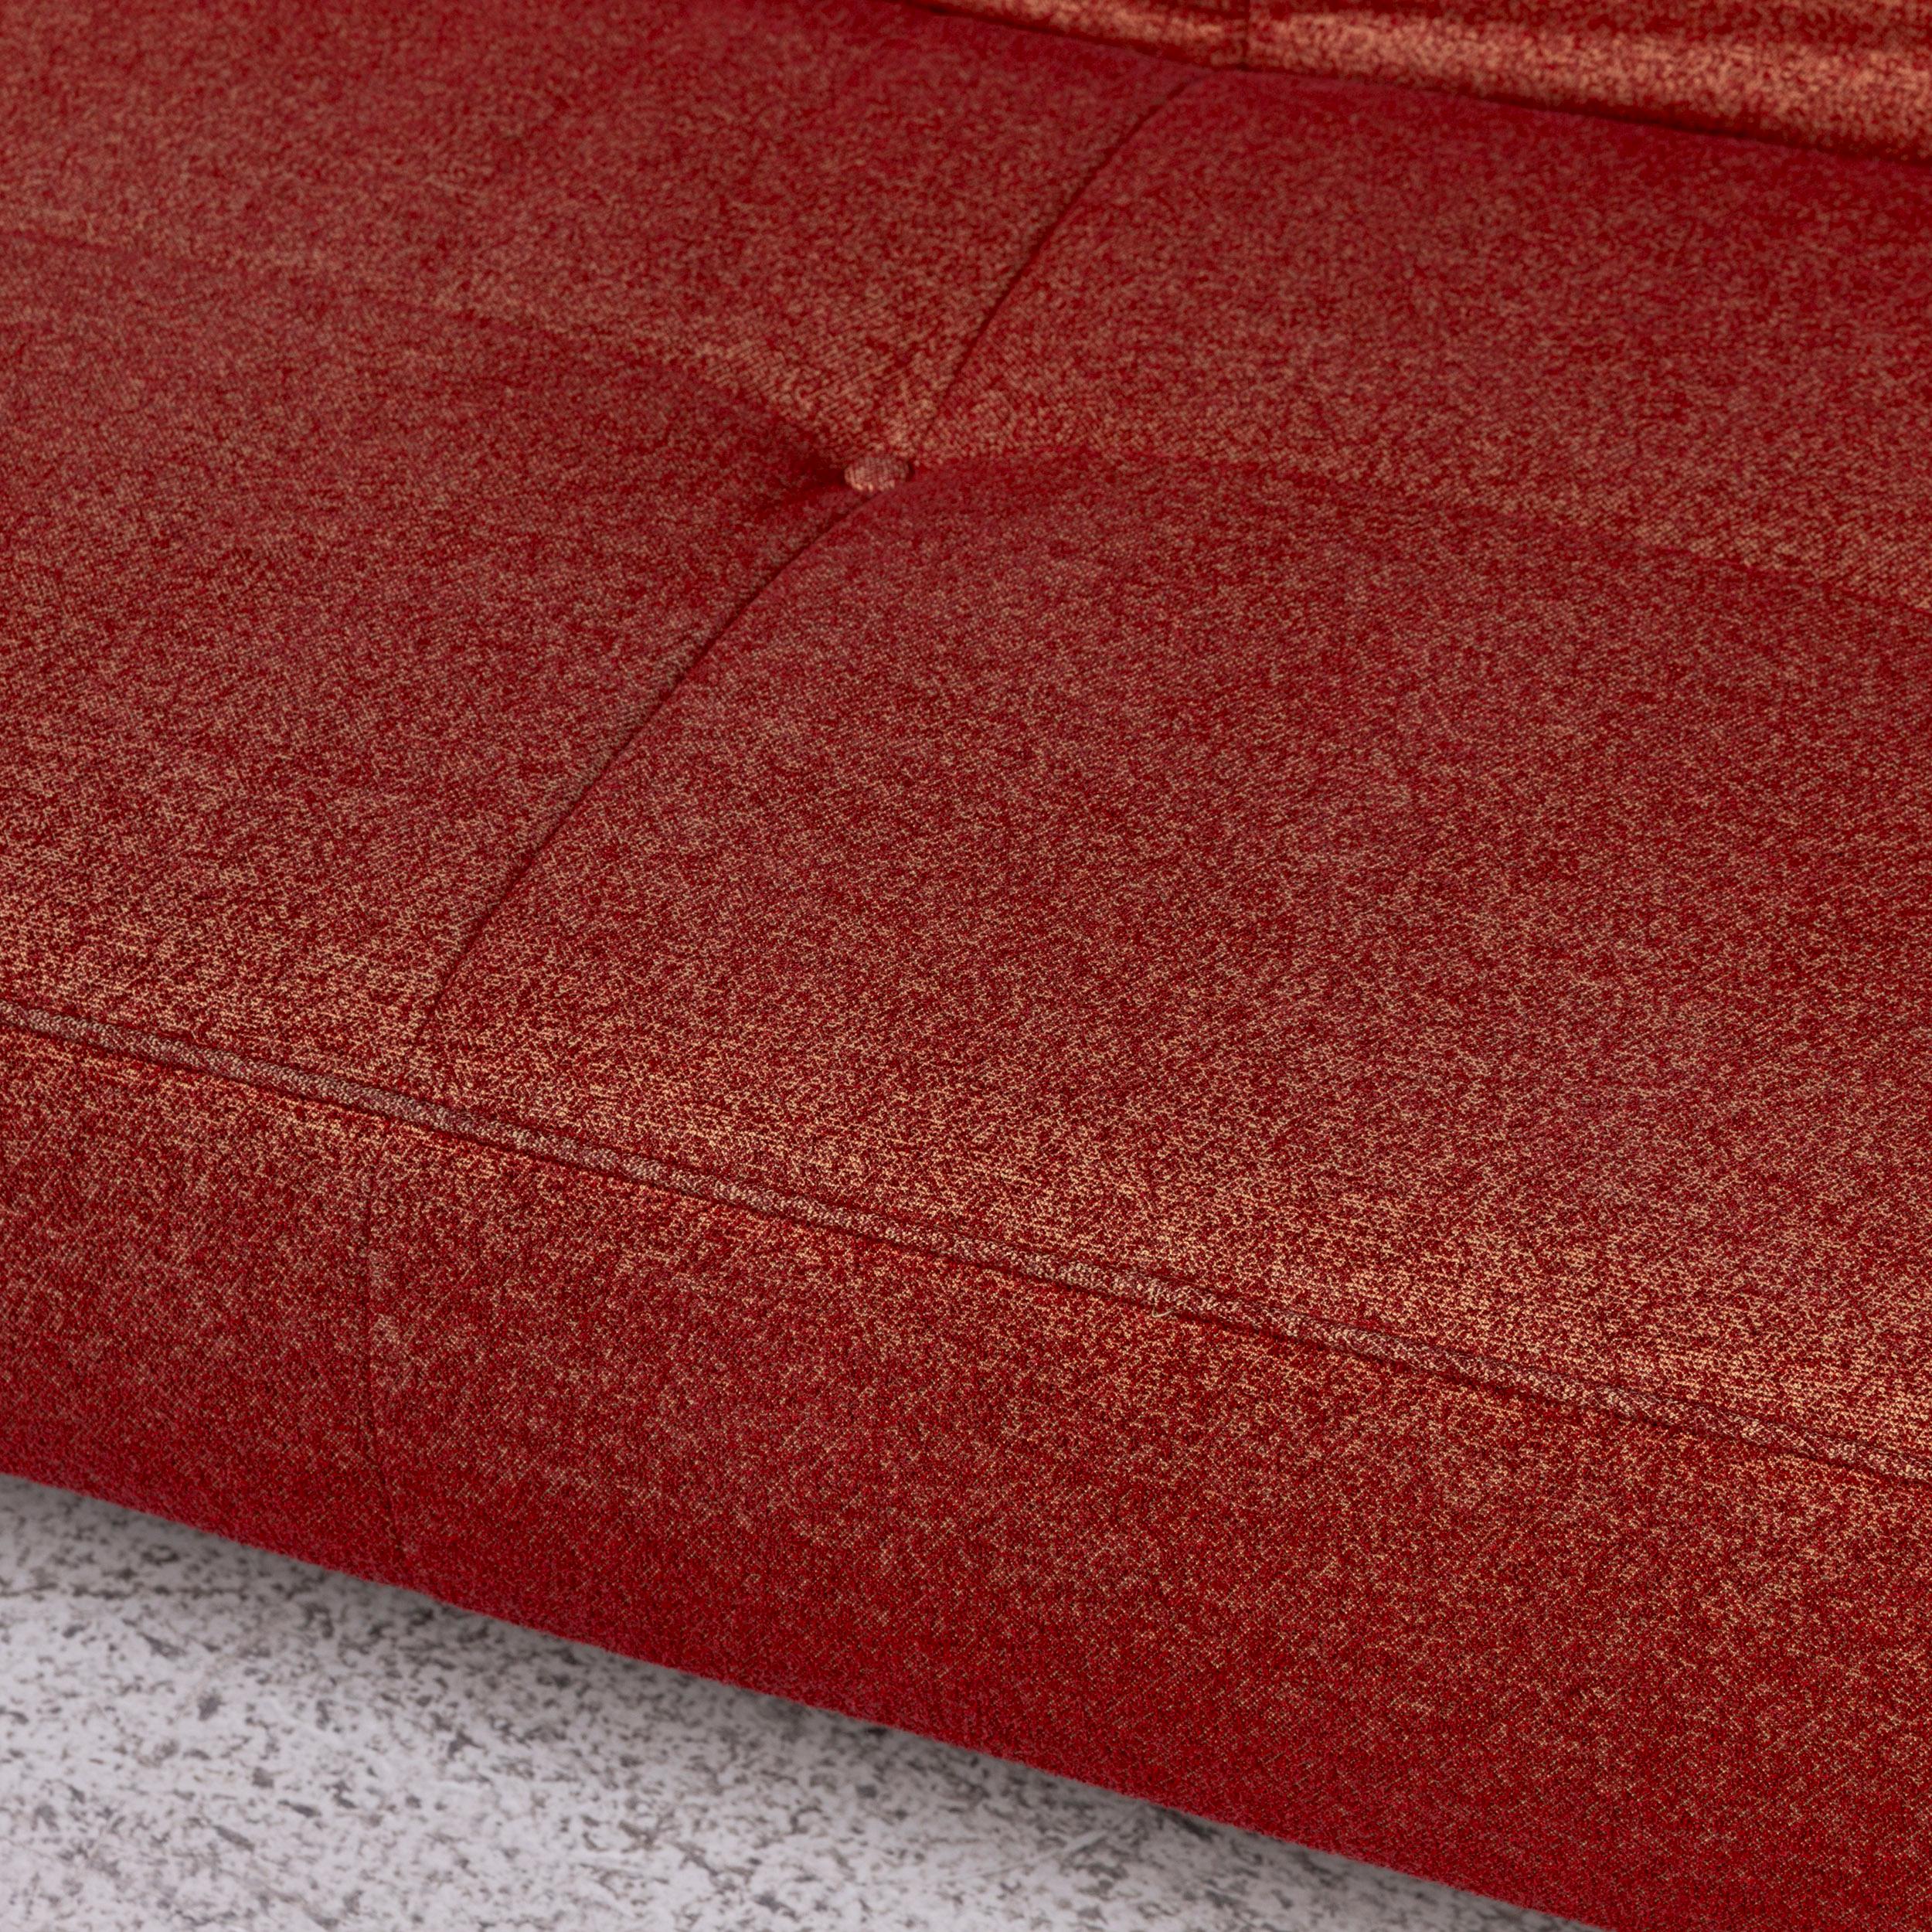 French Ligne Roset Smala Fabric Sofa Red Three-Seat Sofa Bed Function Couch